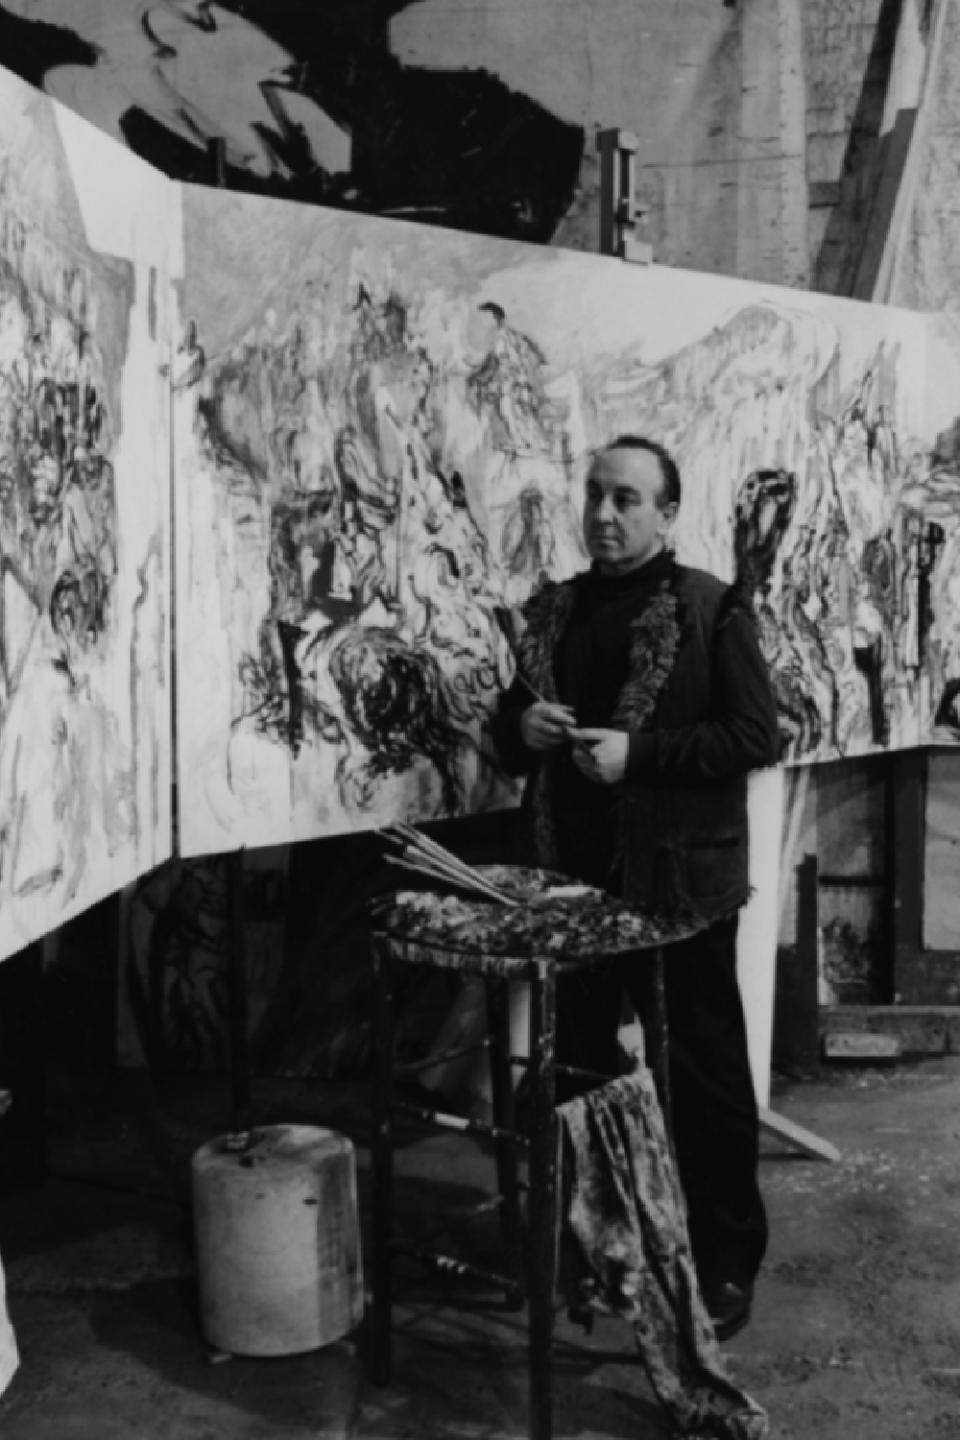 Polish painter Feliks Topolski RA working on a large mural depicting scenes from the Queen's Coronation, which has been commissioned by Prince Philip,